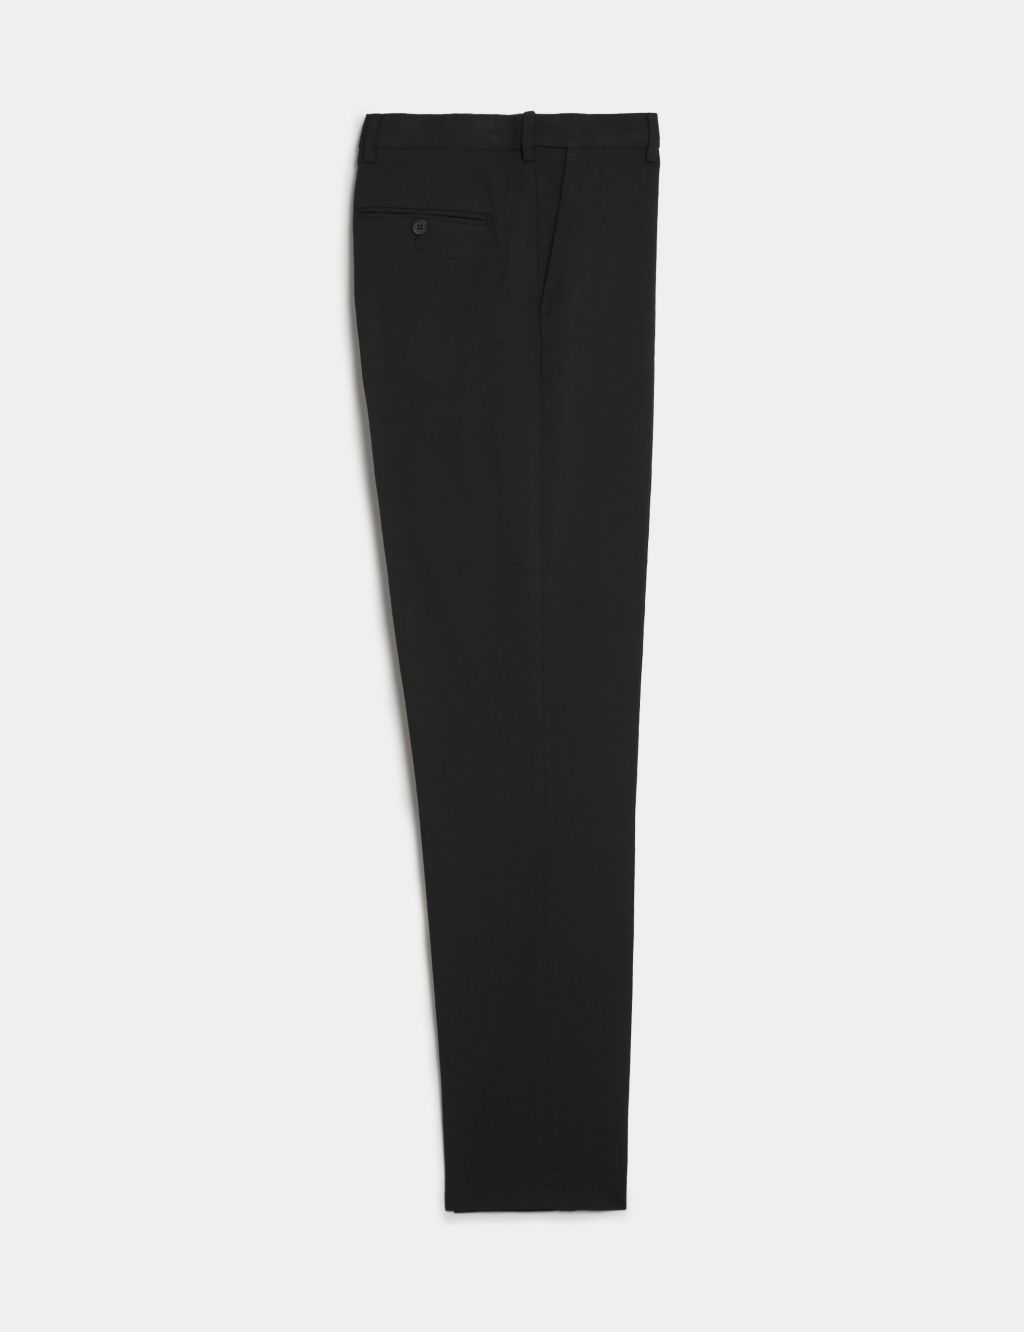 Regular Fit Stretch Trousers image 2